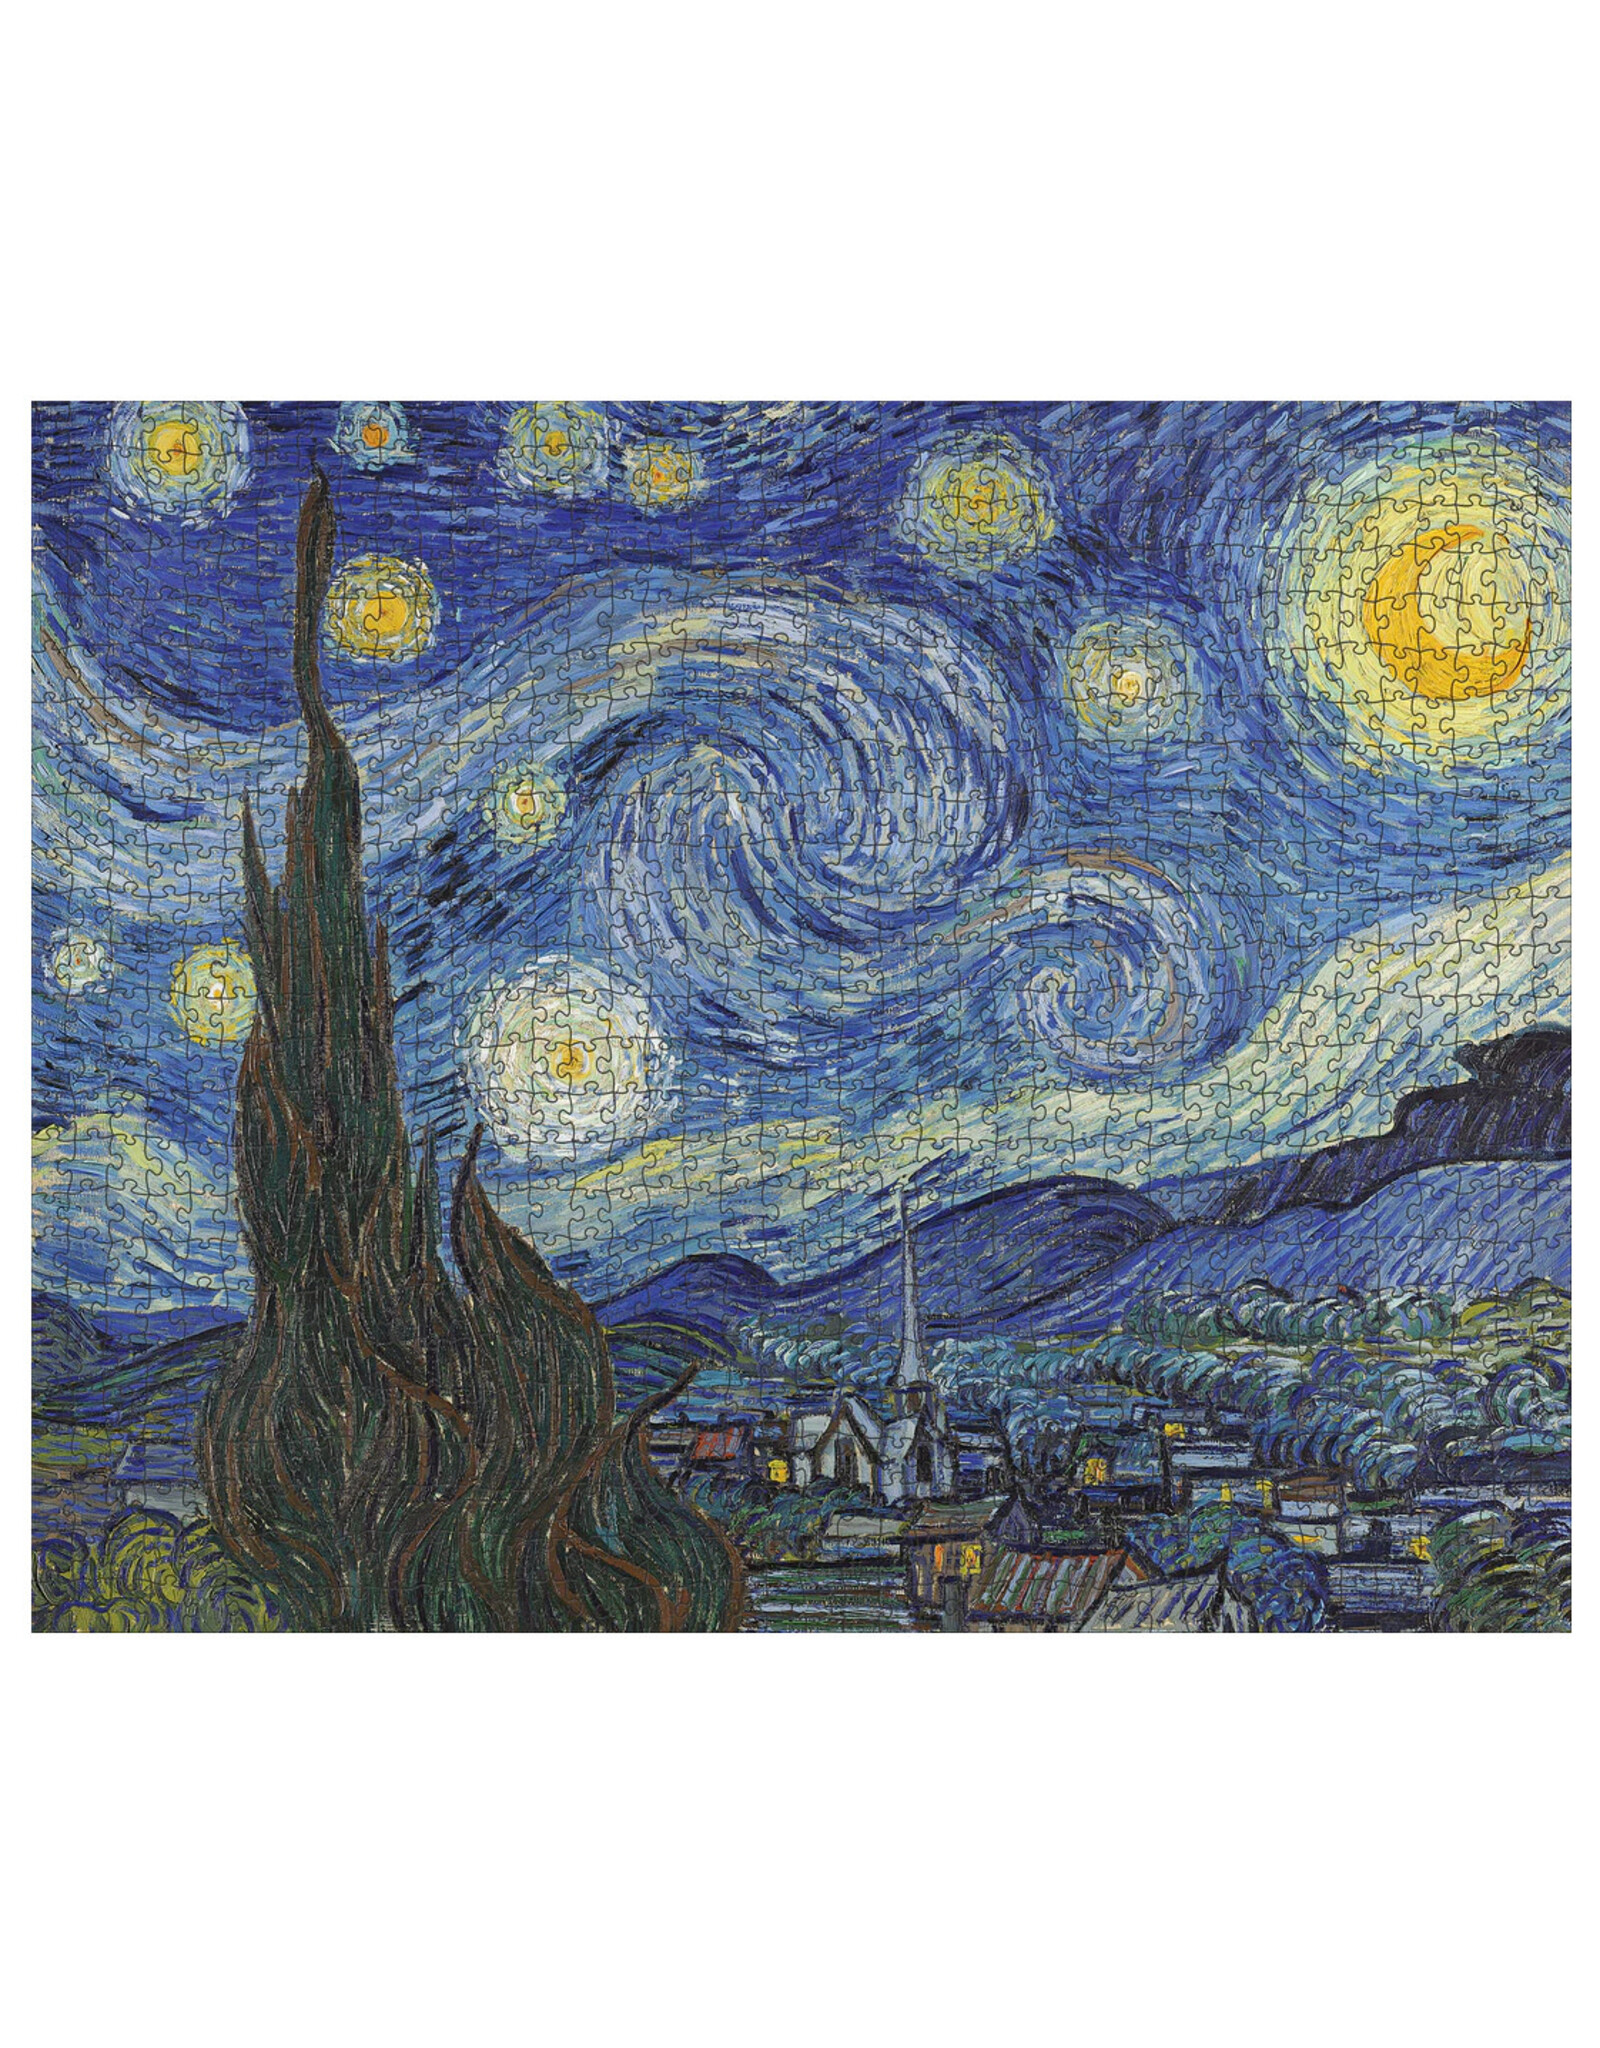 Pomegranate Vincent van Gogh: The Starry Night 1000-Piece Jigsaw Puzzle